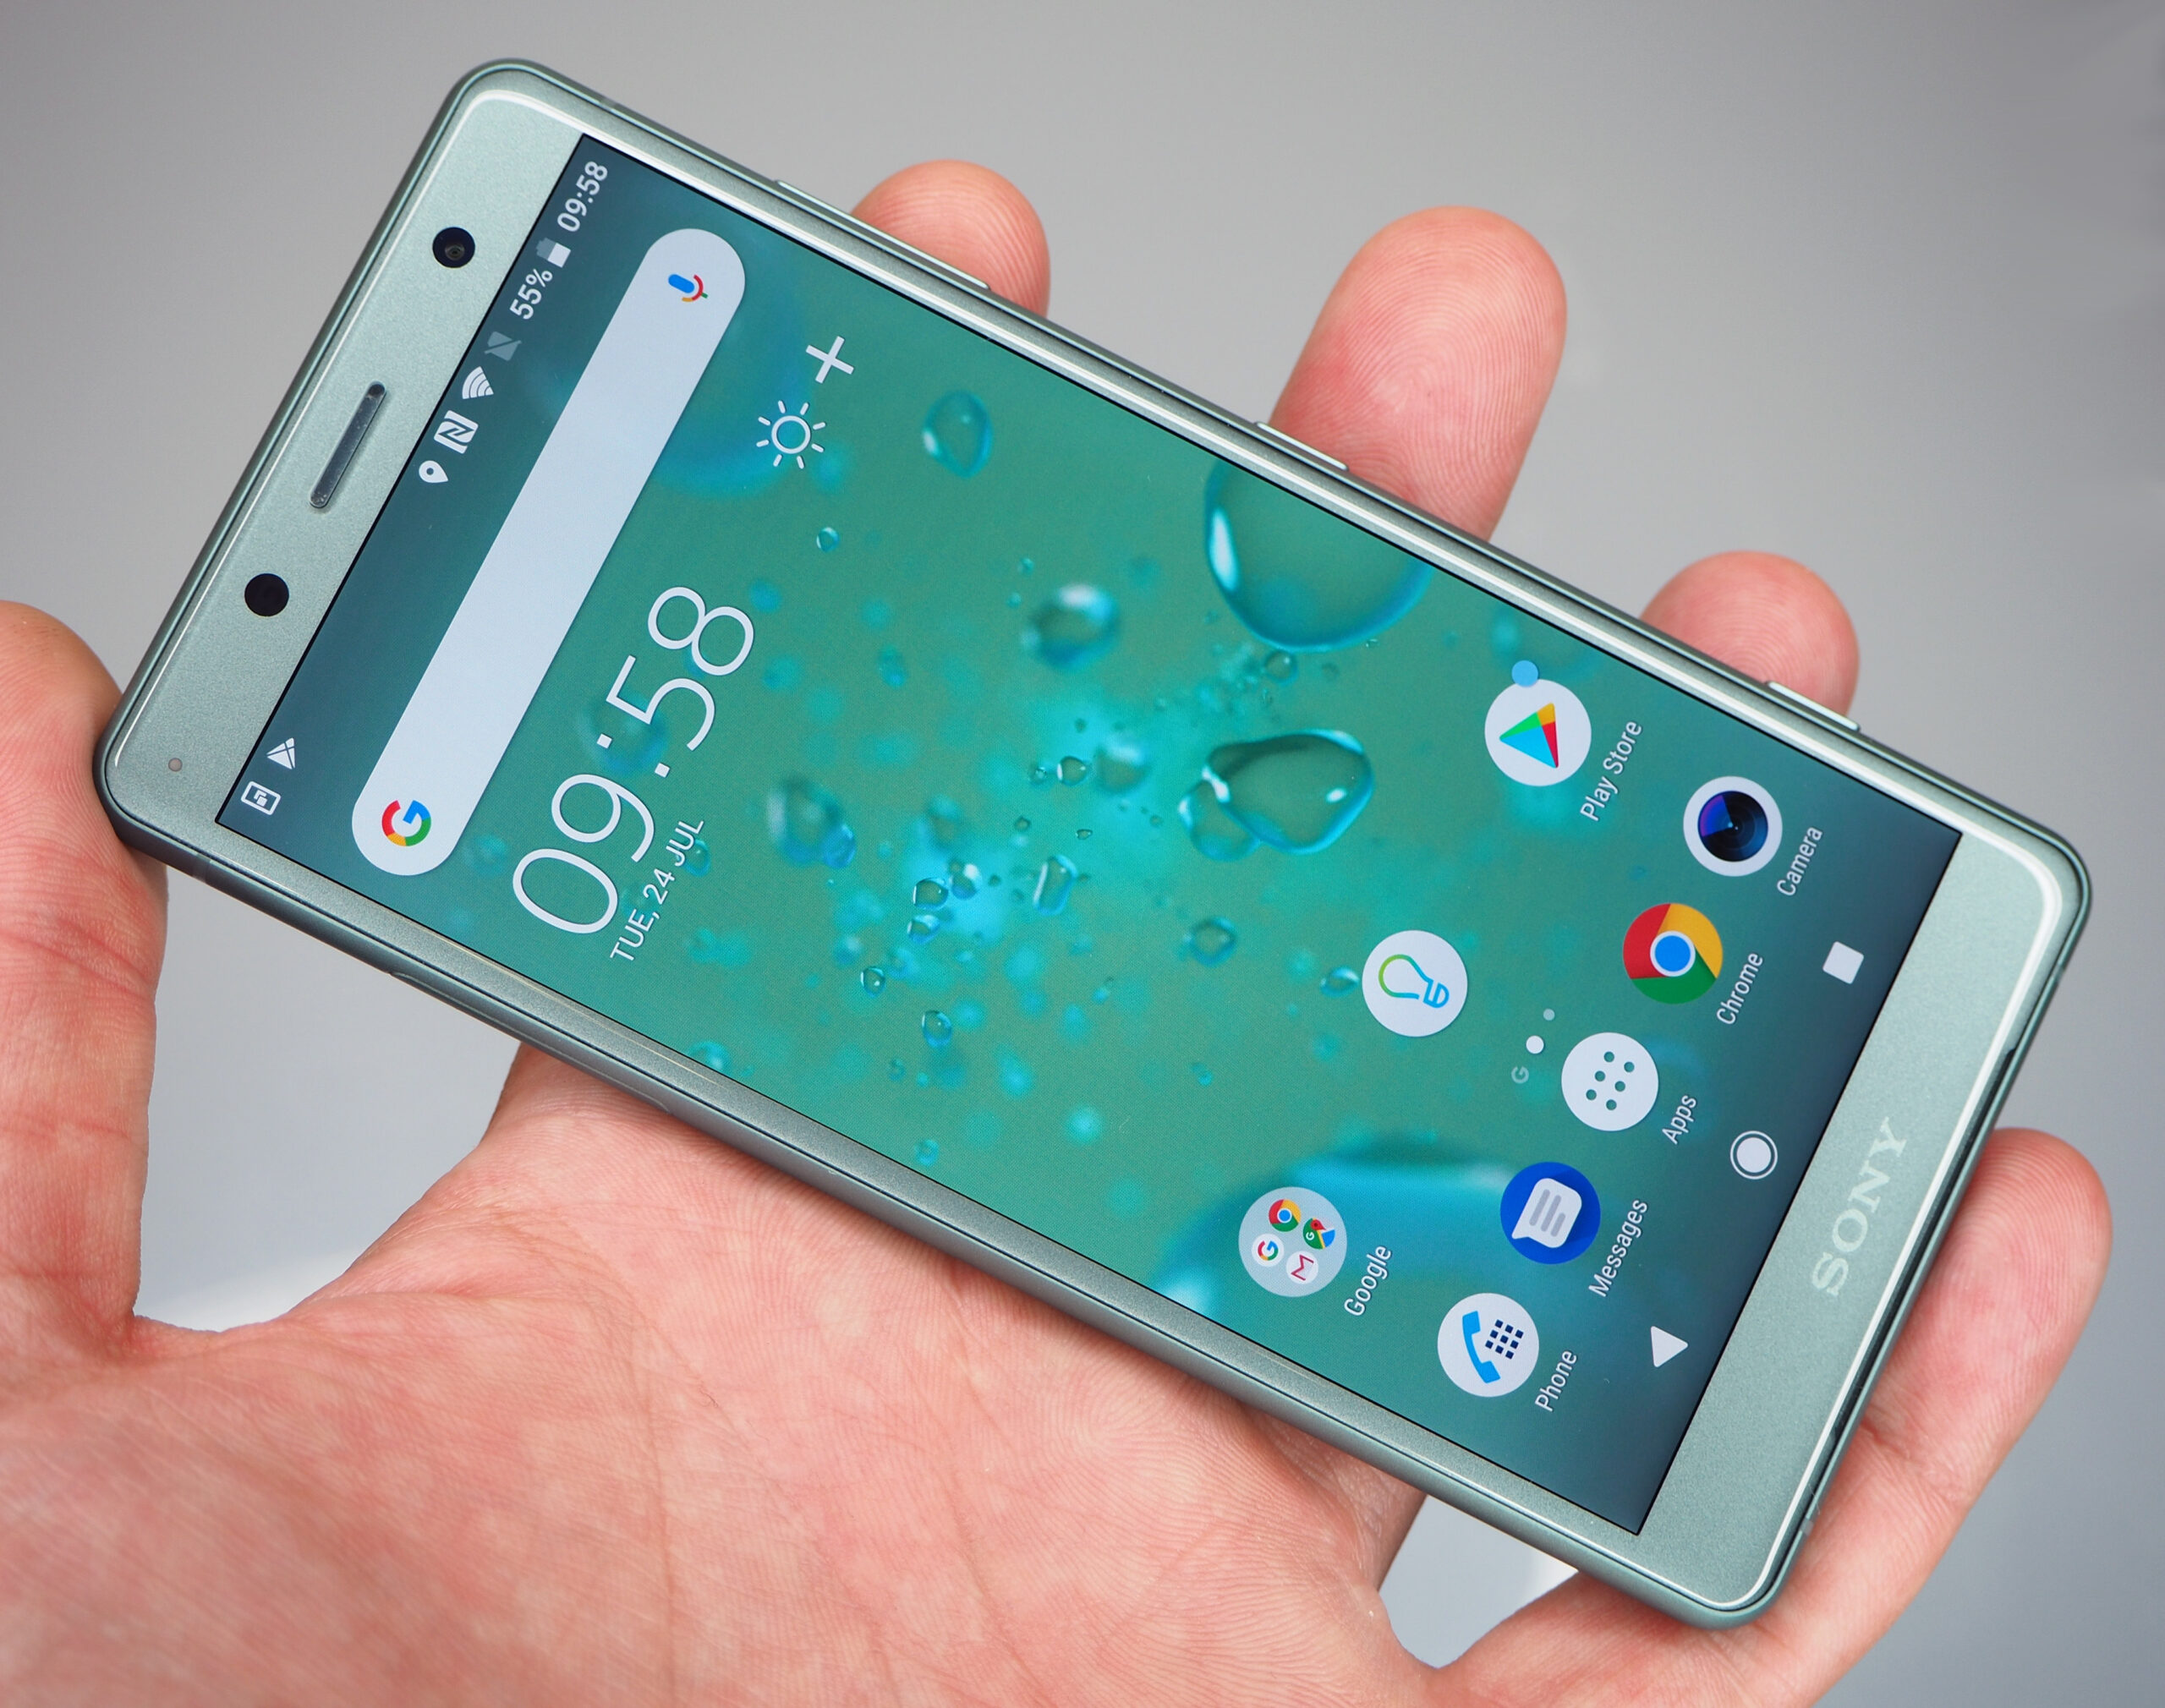 highres Sony Xperia XZ2 Compact Green 2 1532427760 scaled